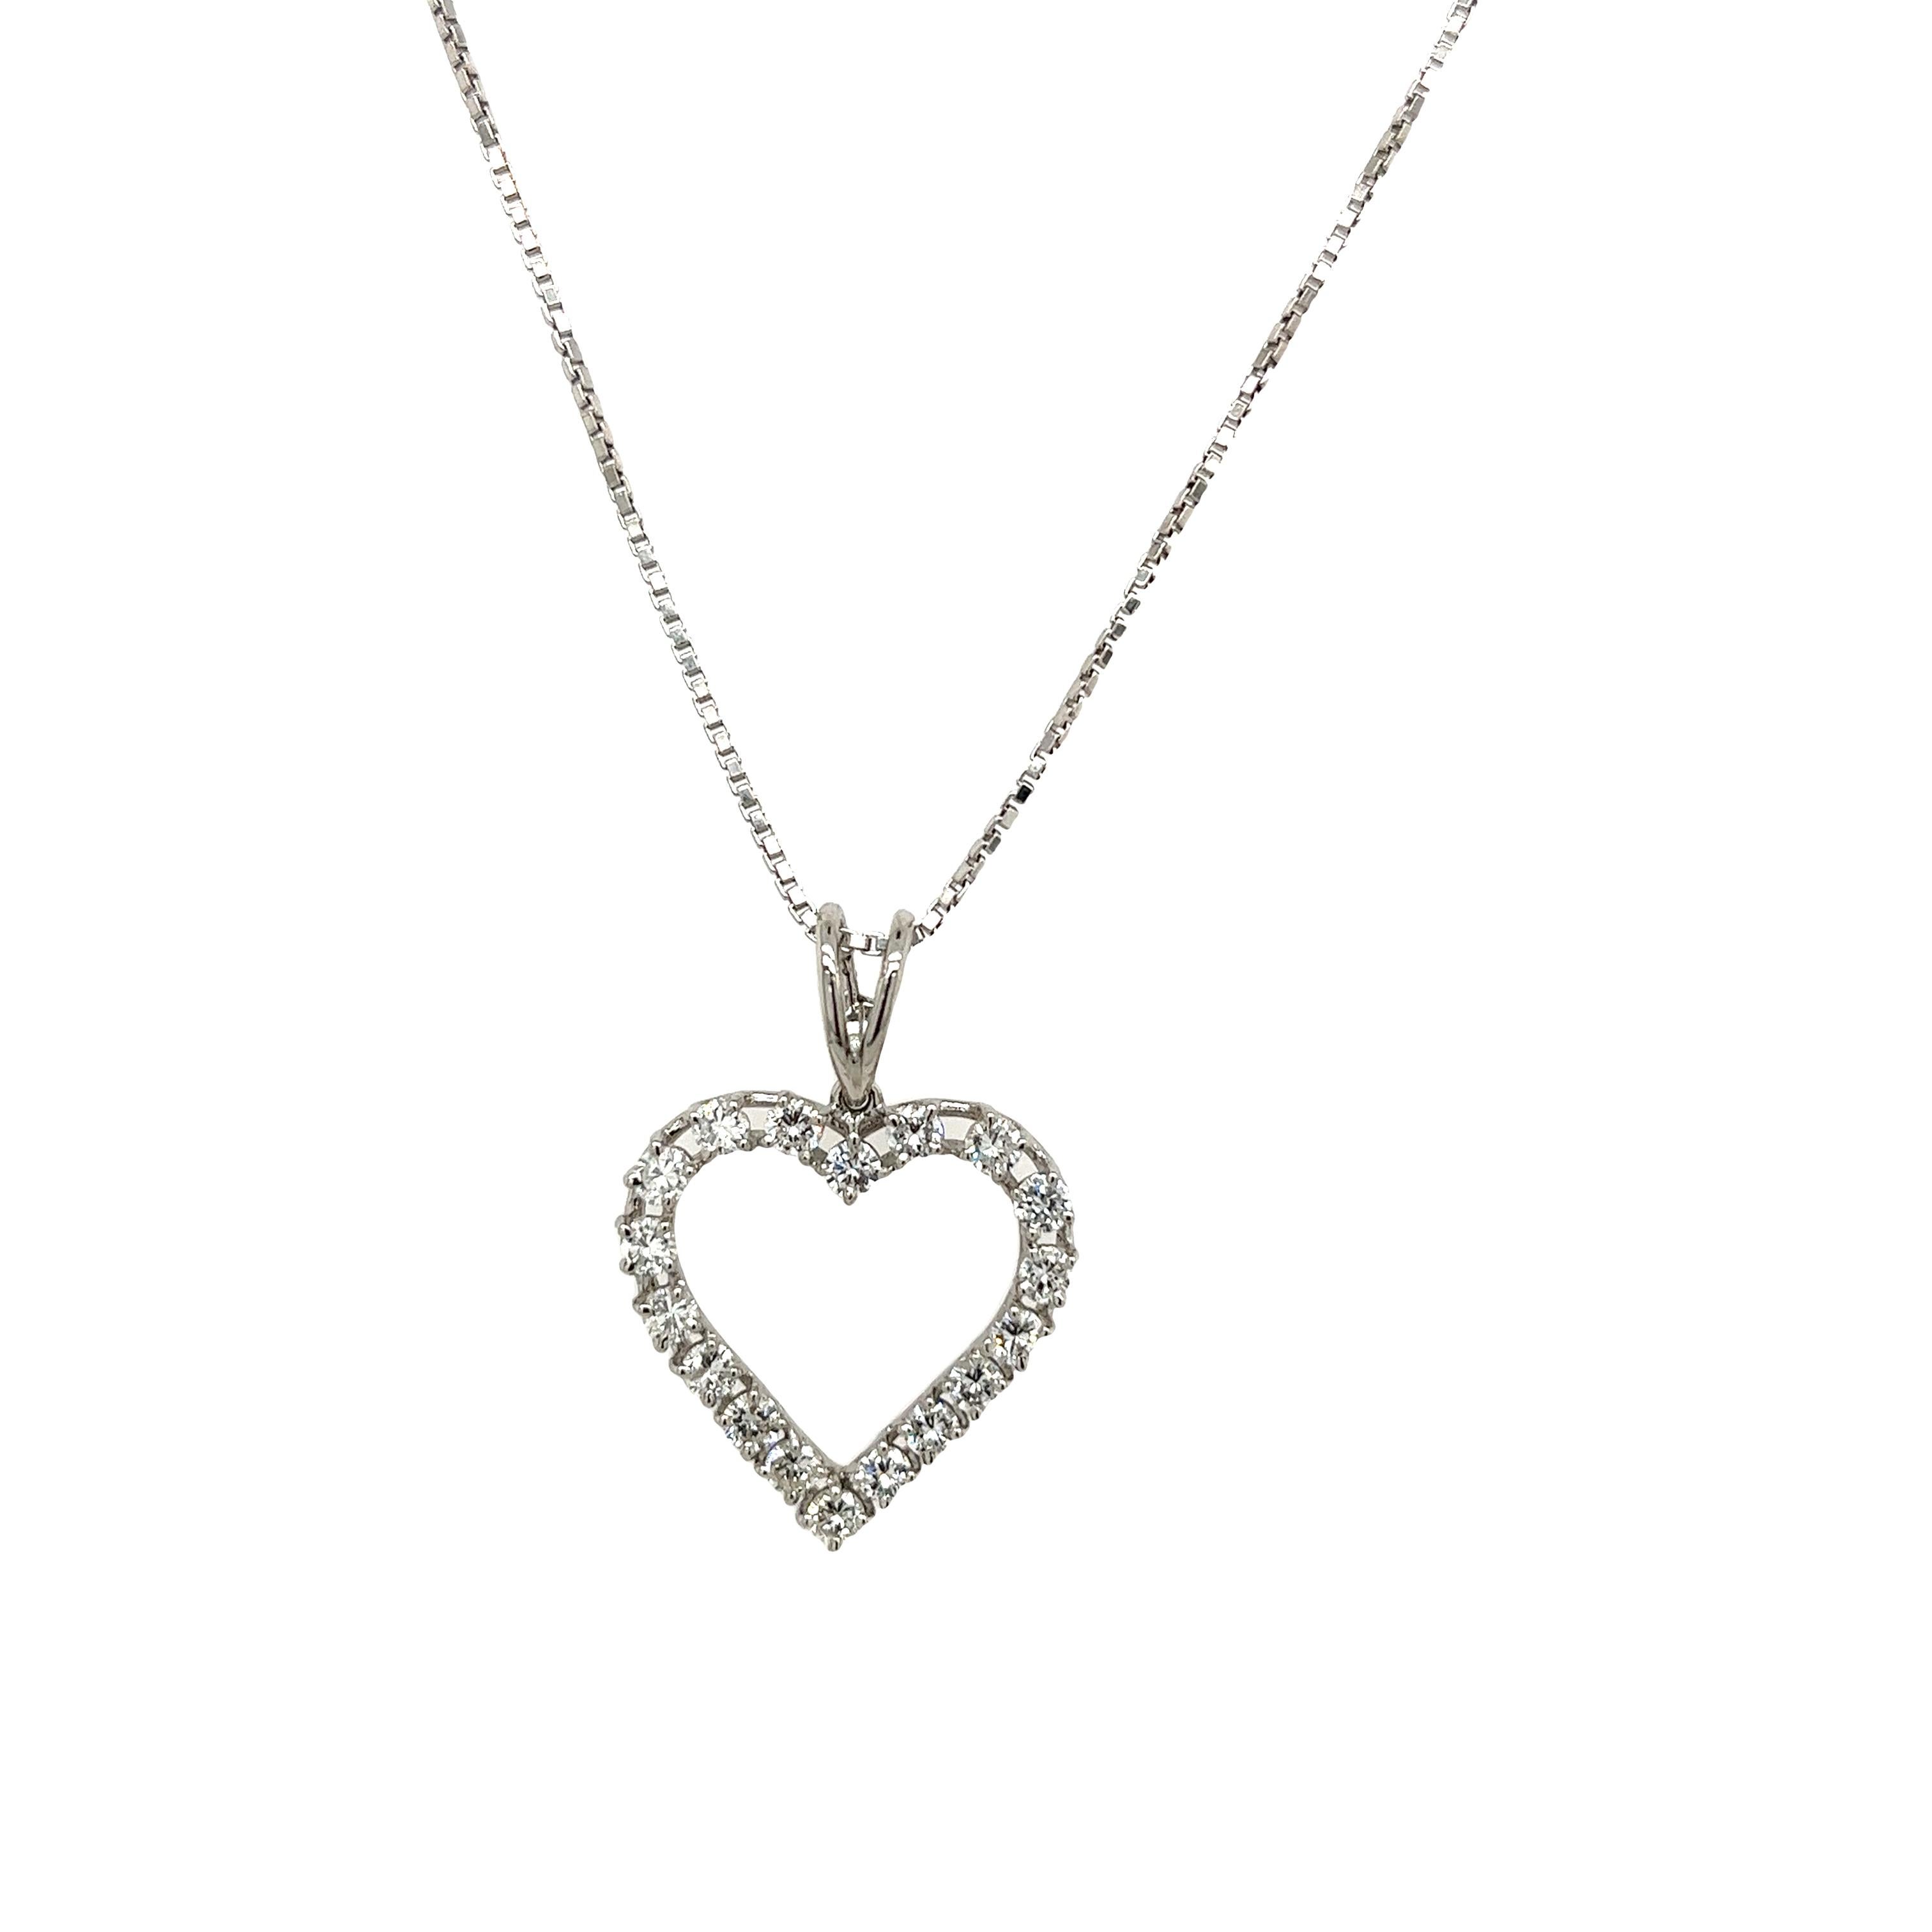 This gorgeous diamond heart pendant 
is set with with a total of 0.70 carats round brilliant cut diamonds in 18ct white gold. 
The pendant is suspended from a 18ct white gold chain 
Venetian style that measures 18 inches.
Chain Length: 18